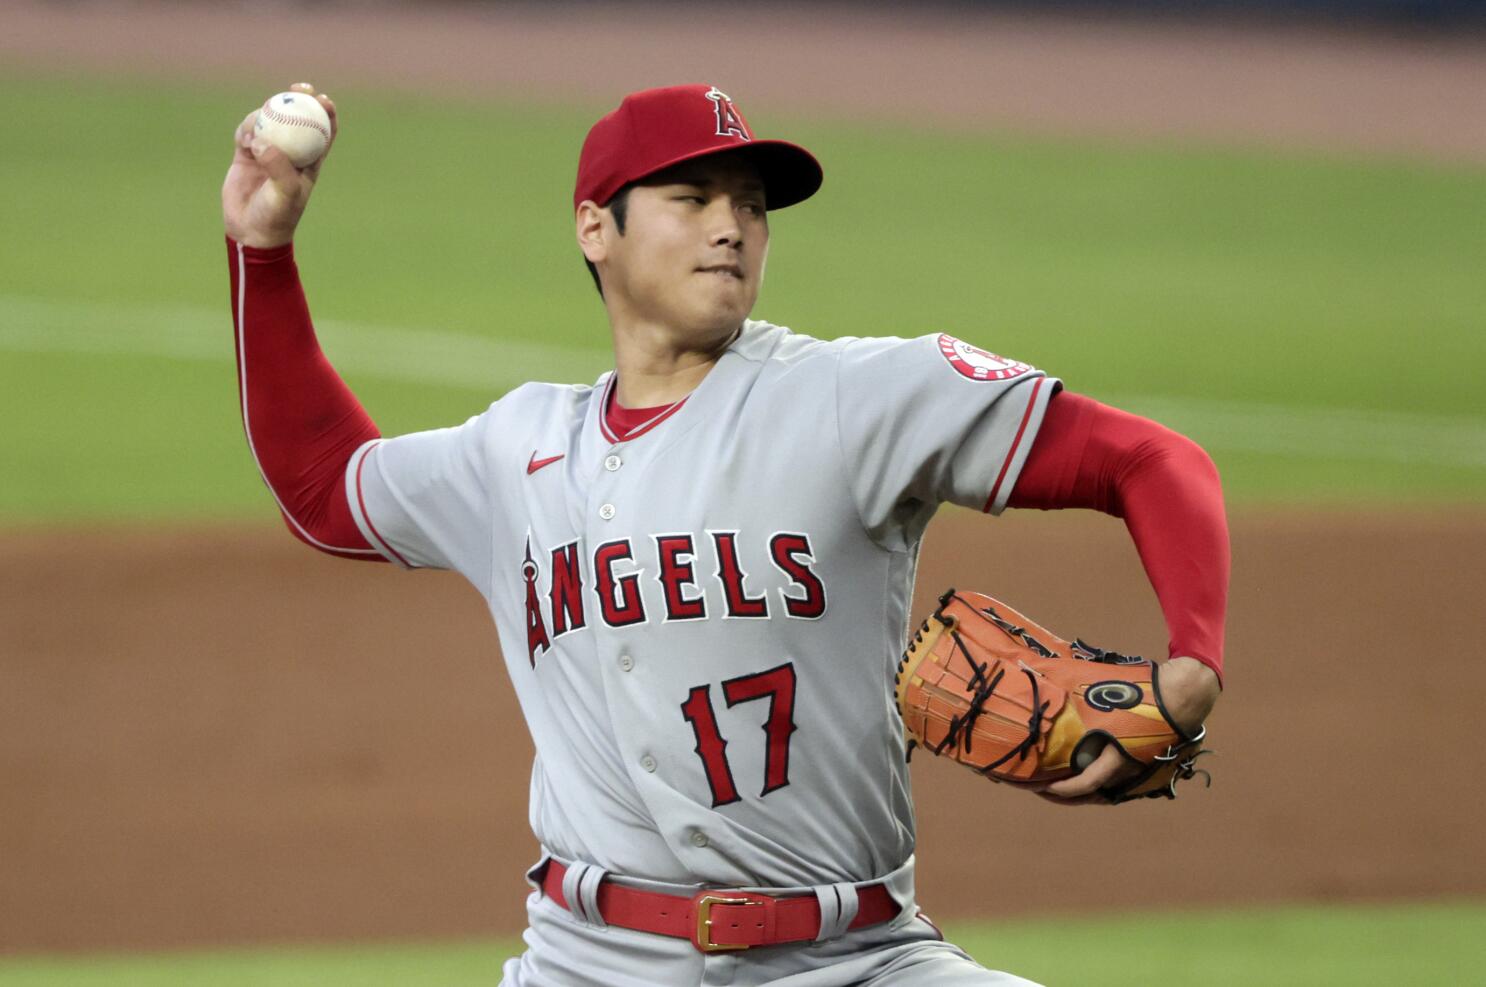 Angels should trade Shohei Ohtani, former Yankees ace says